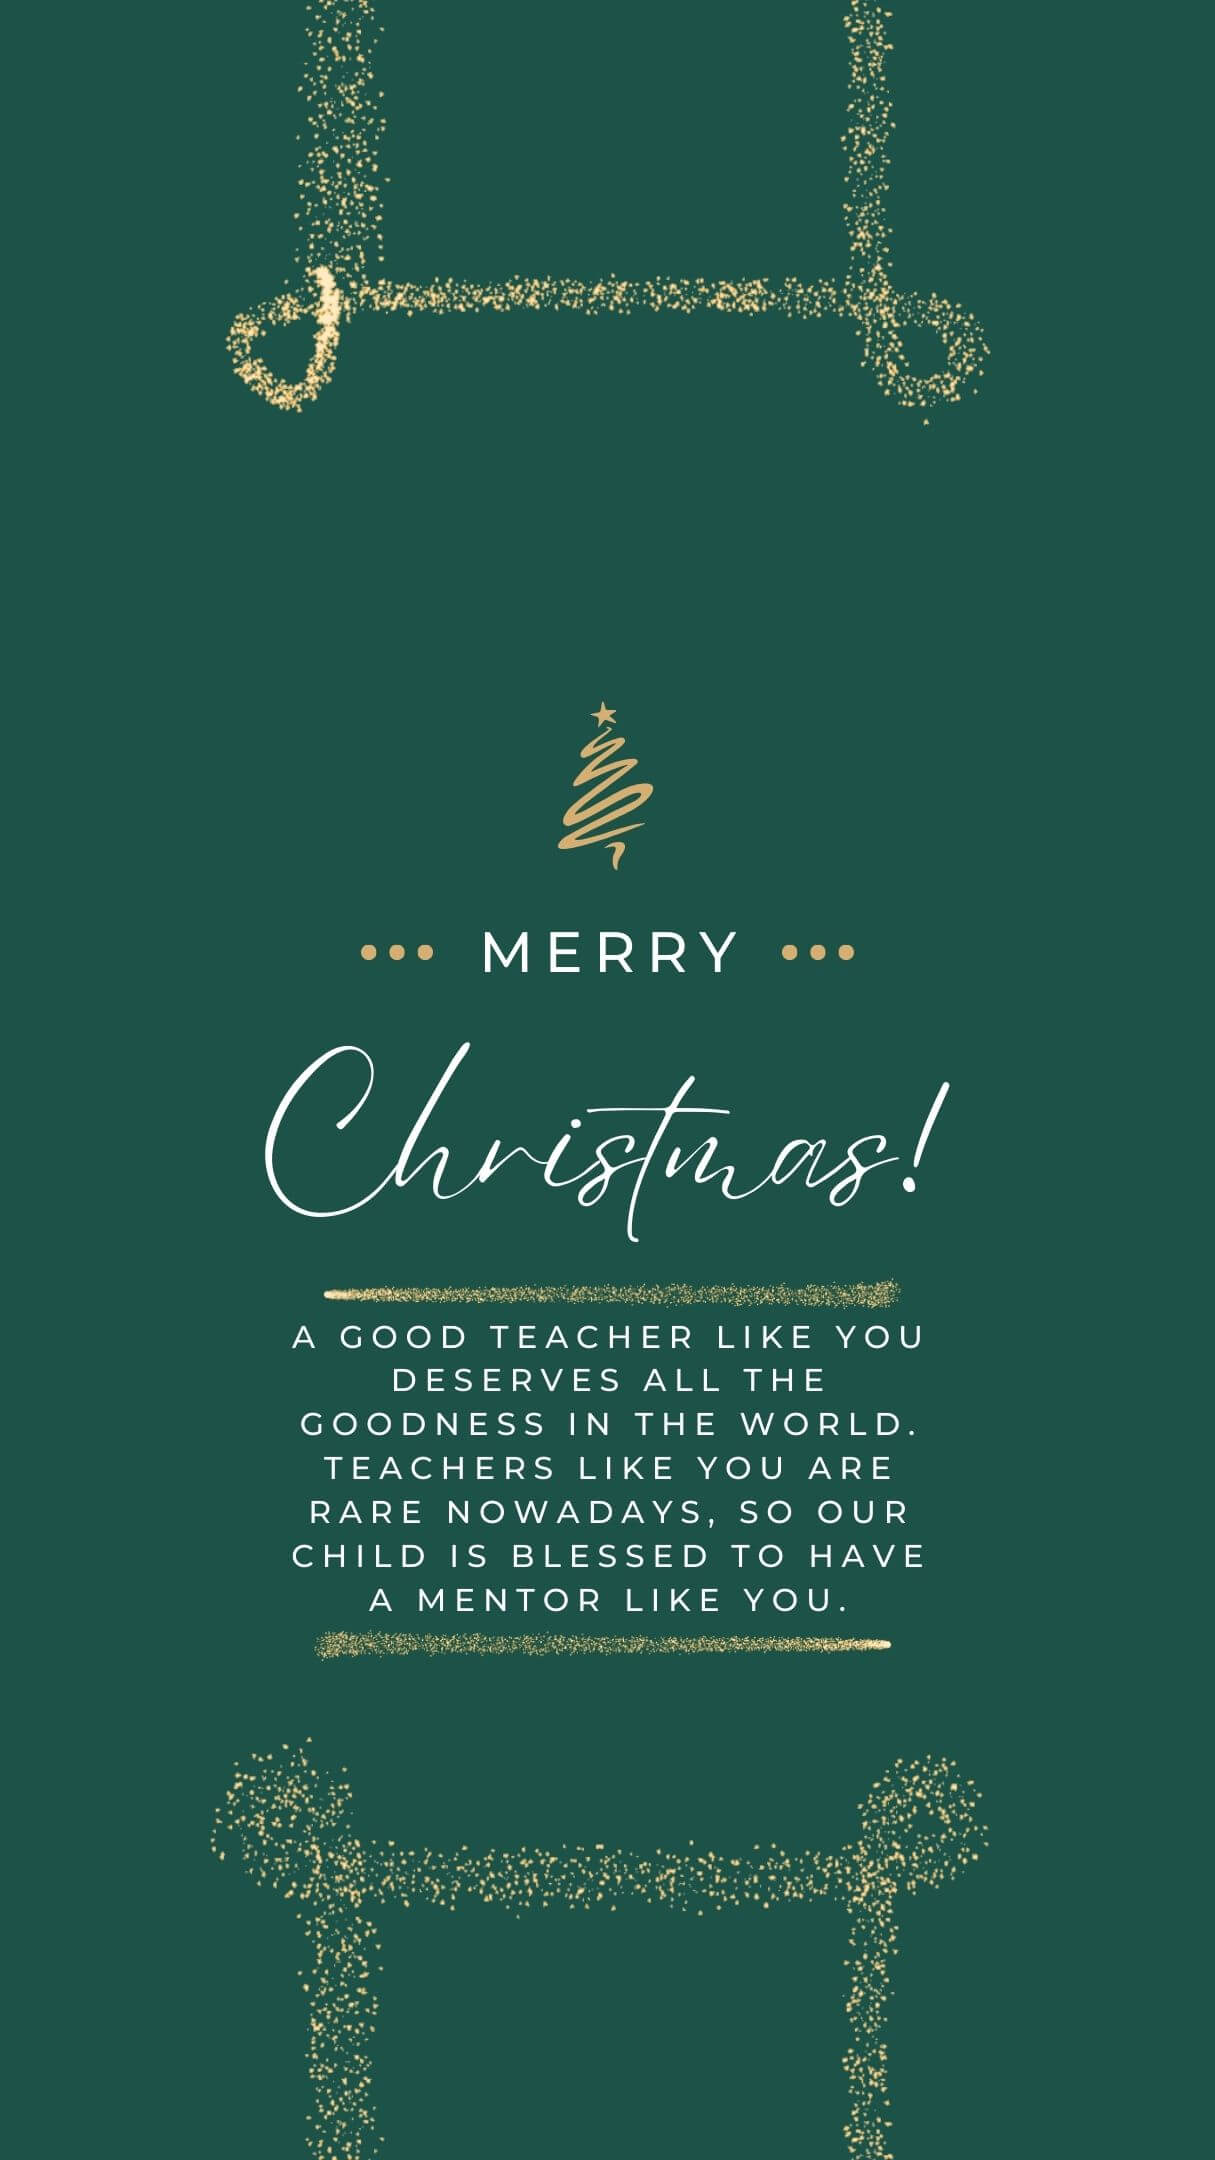 Merry Christmas Wishes For Teachers From Parents